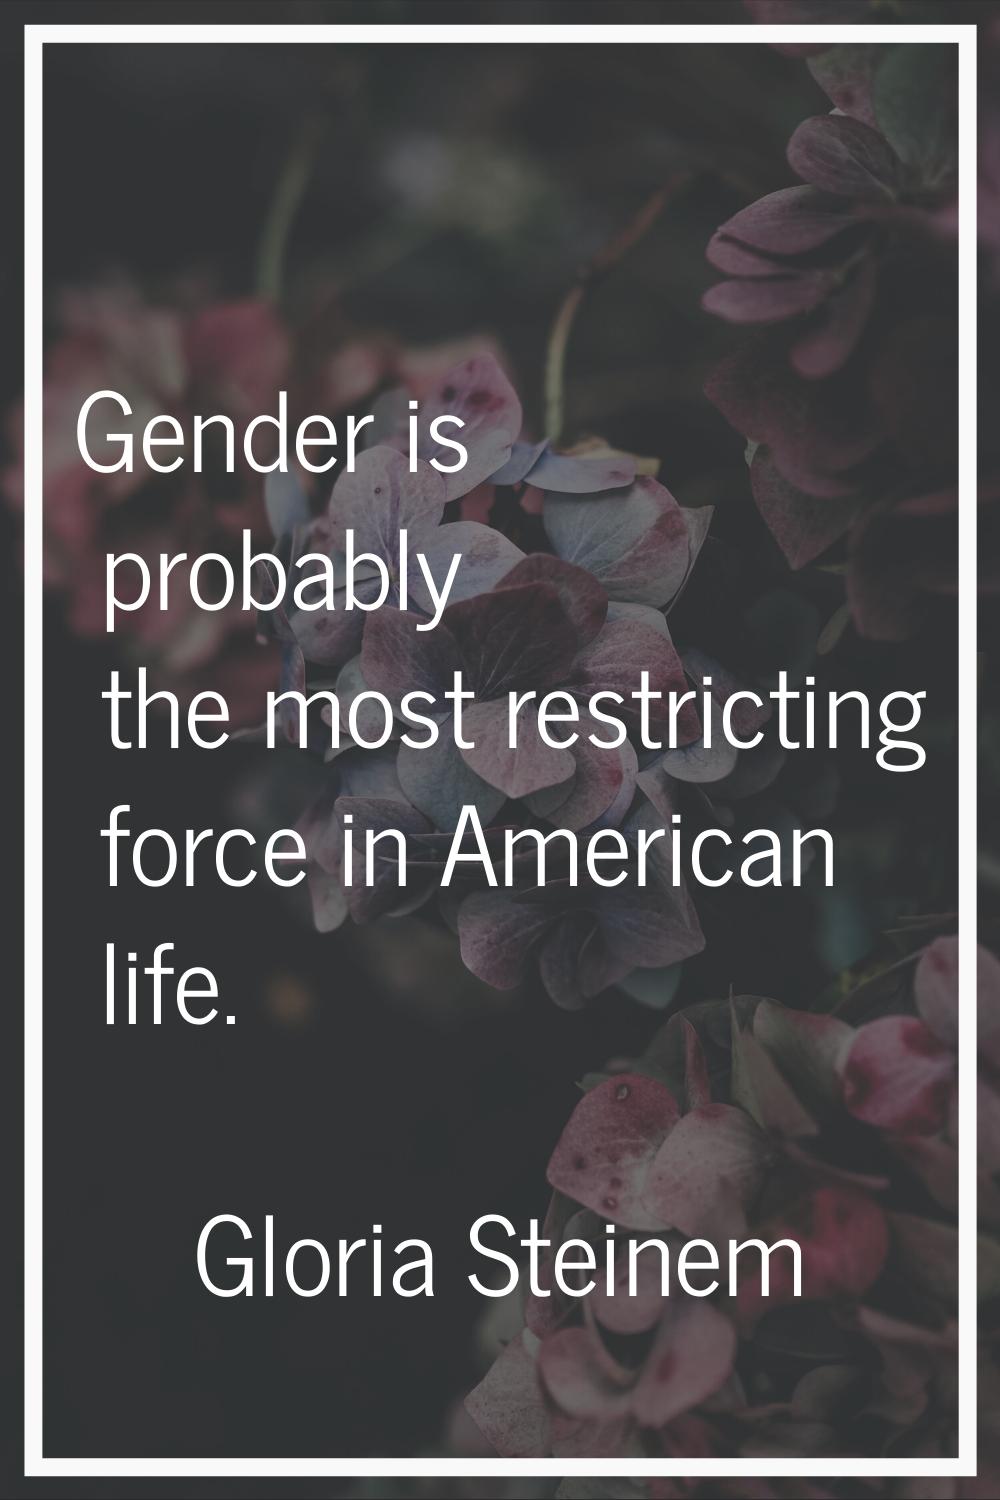 Gender is probably the most restricting force in American life.